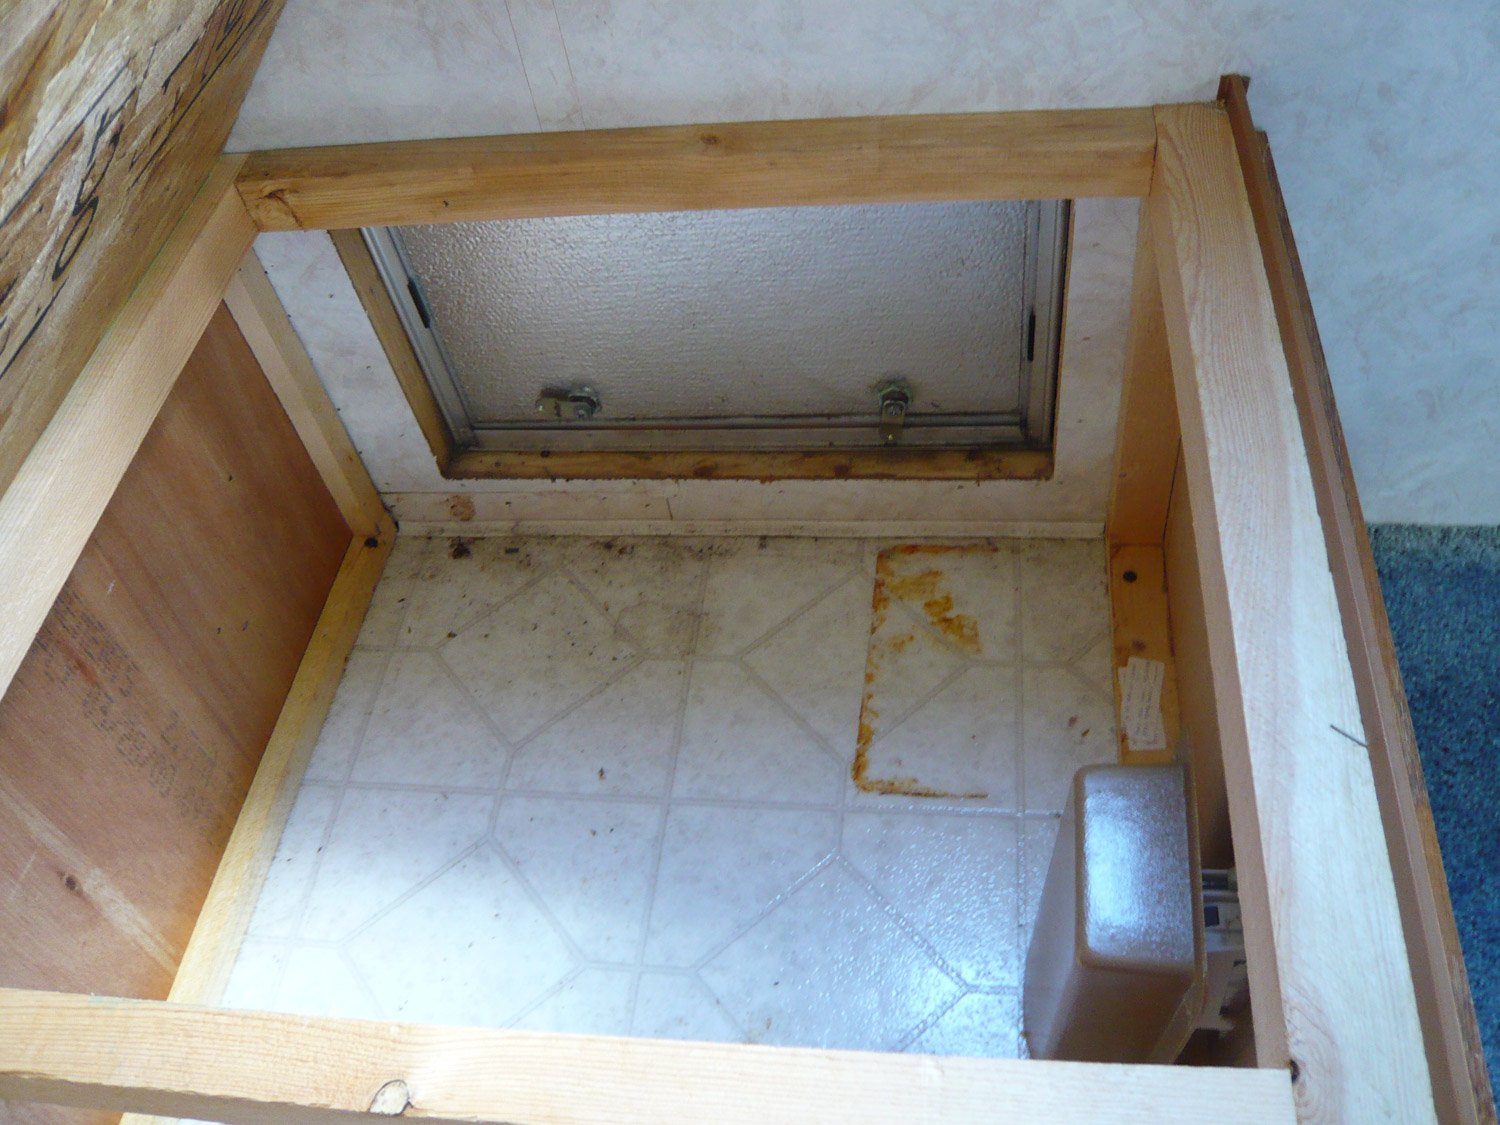  The space under one of the dinettes was accessible from outside the RV.&nbsp; 